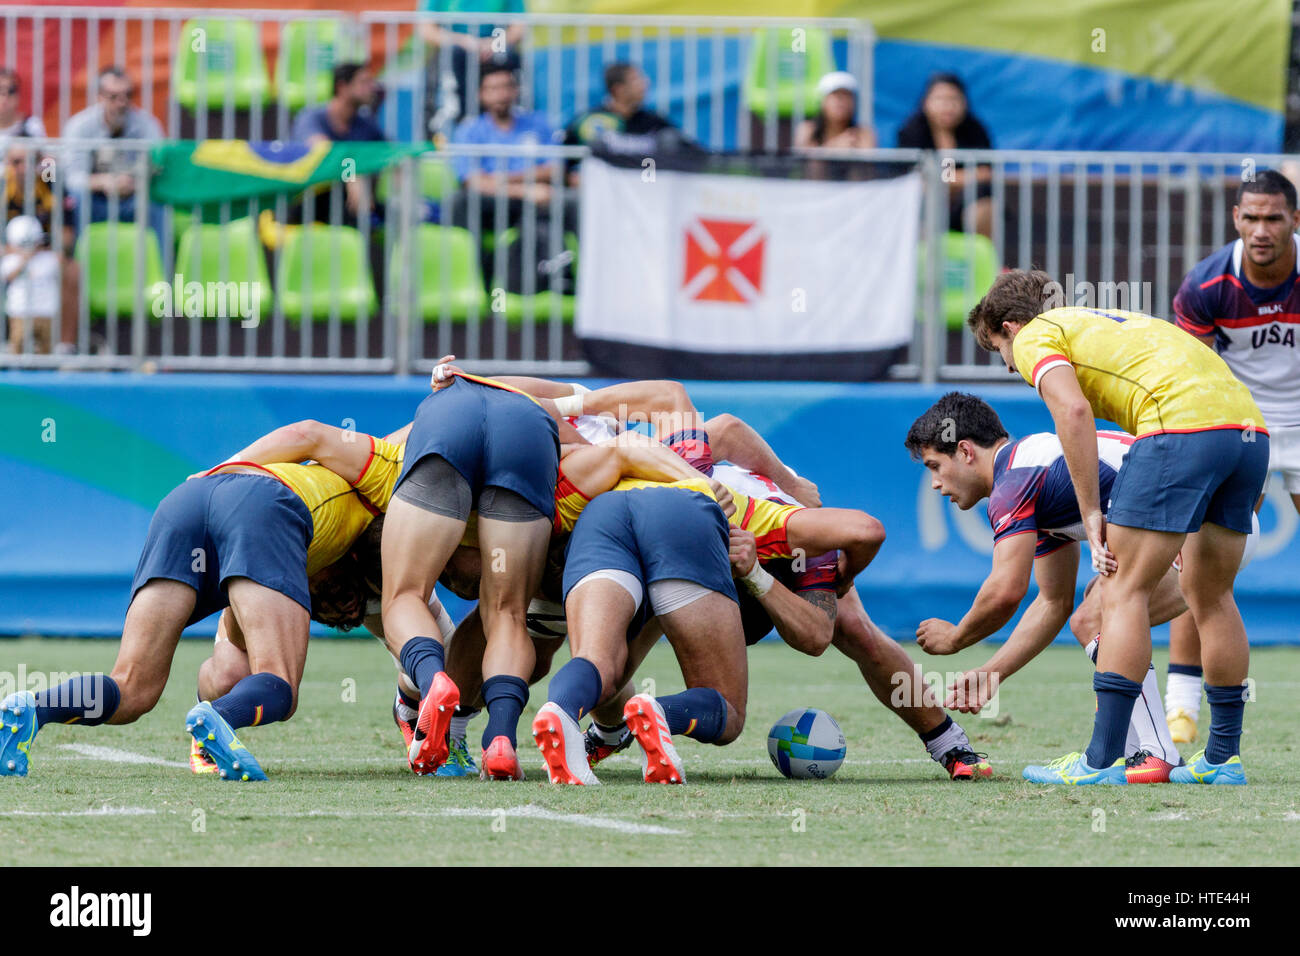 Rio de Janeiro, Brazil. 11 August 2016  Scrum during USA and Spain match in the Men's  Rugby Sevens  at the 2016 Olympic Summer Games. ©Paul J. Sutton Stock Photo